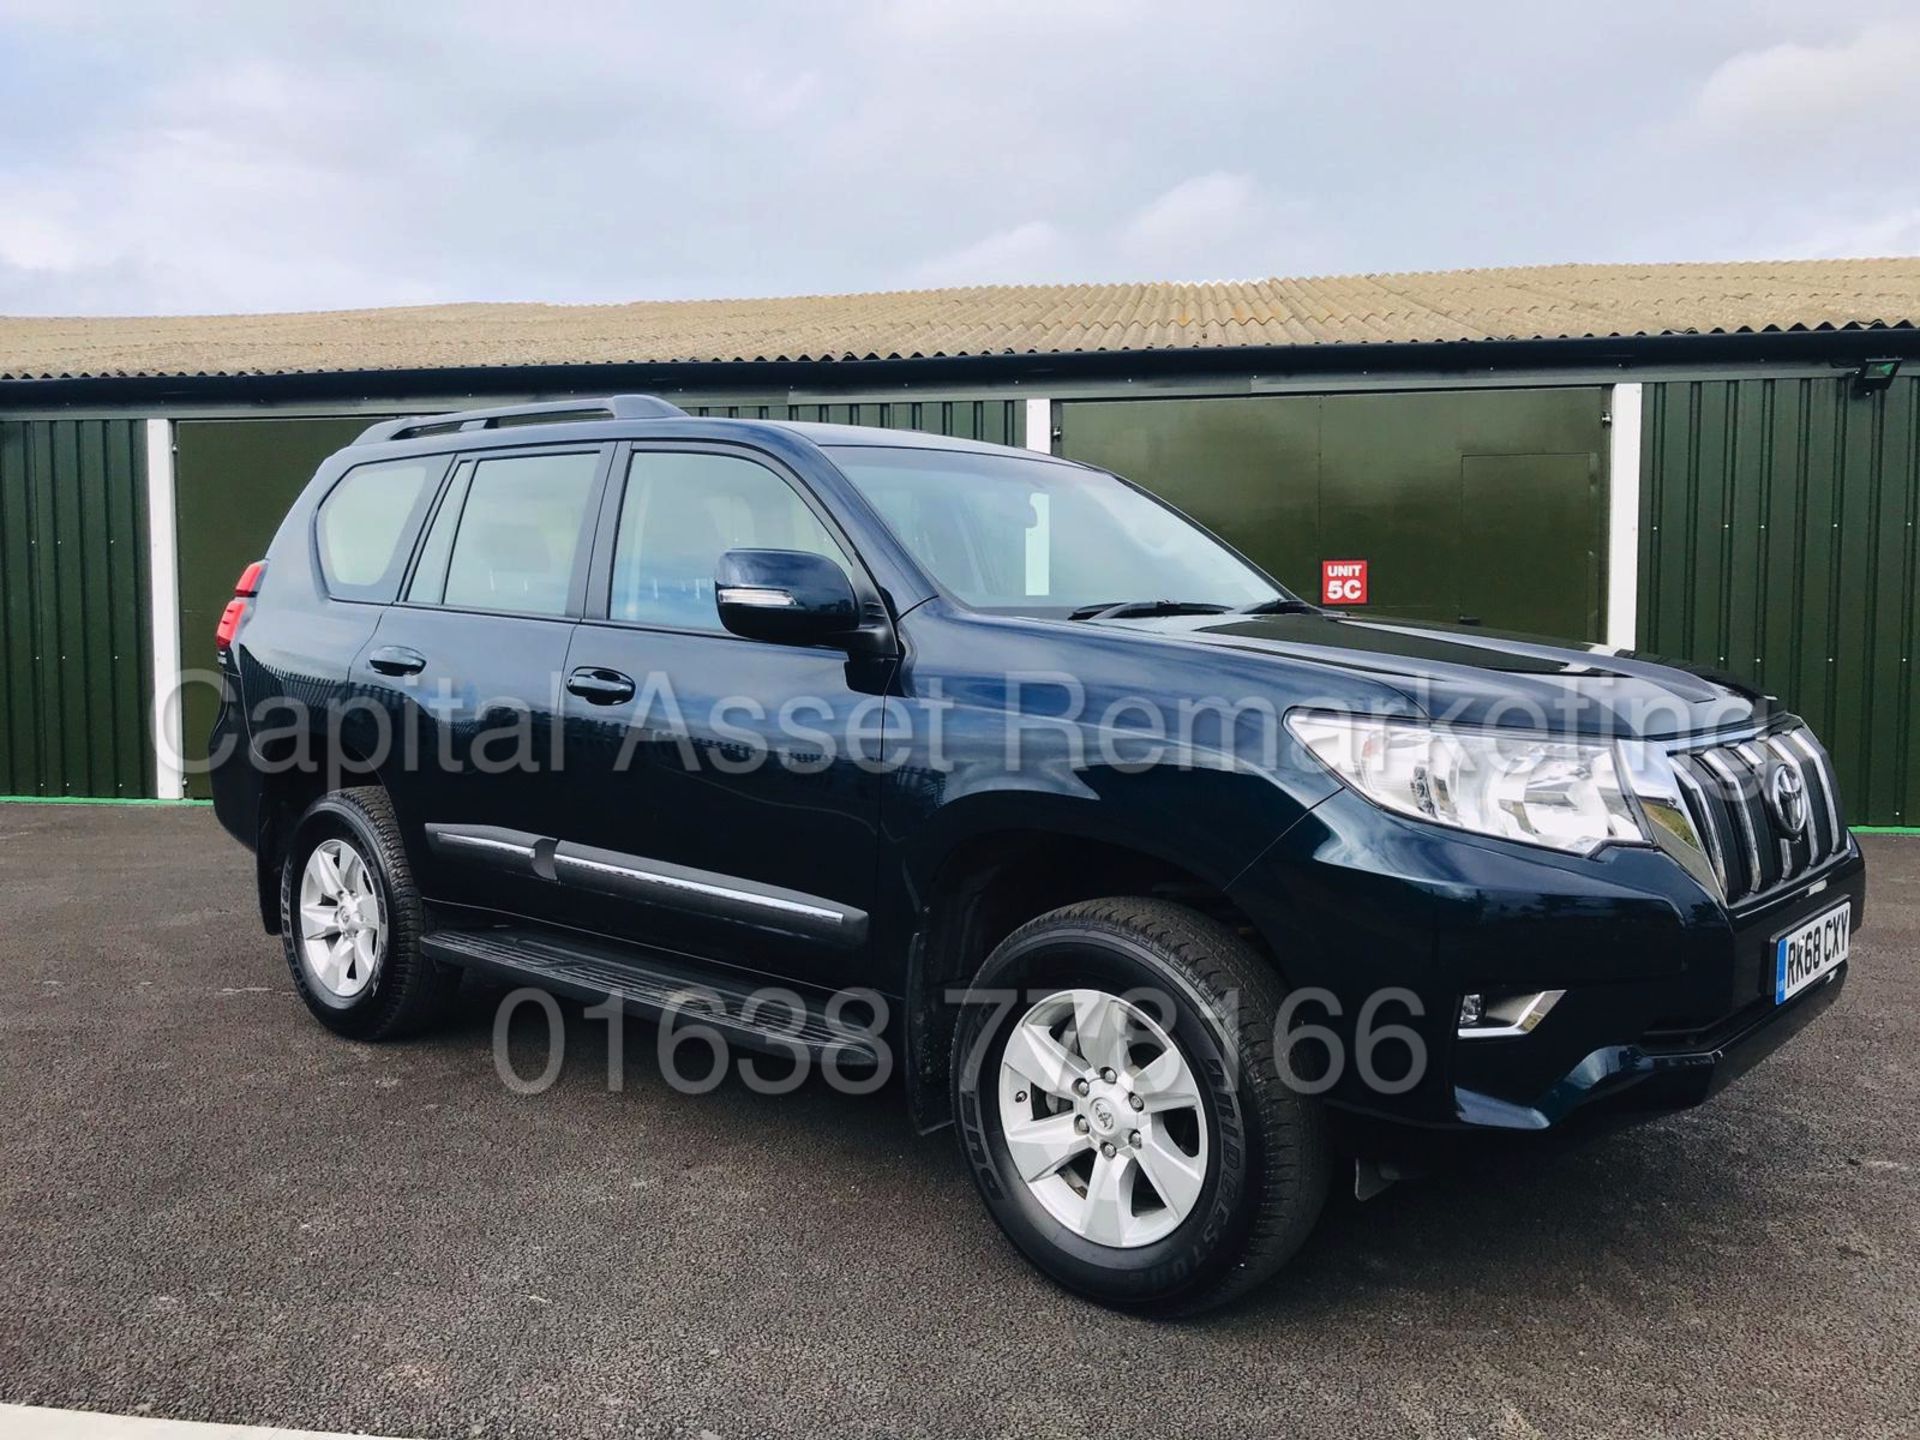 TOYOTA LAND CRUISER *4X4 SUV* (2019 MODEL) '2.8 D-4D - AUTOMATIC' **AIR CON - SAT NAV** (HUGE SPEC) - Image 5 of 27